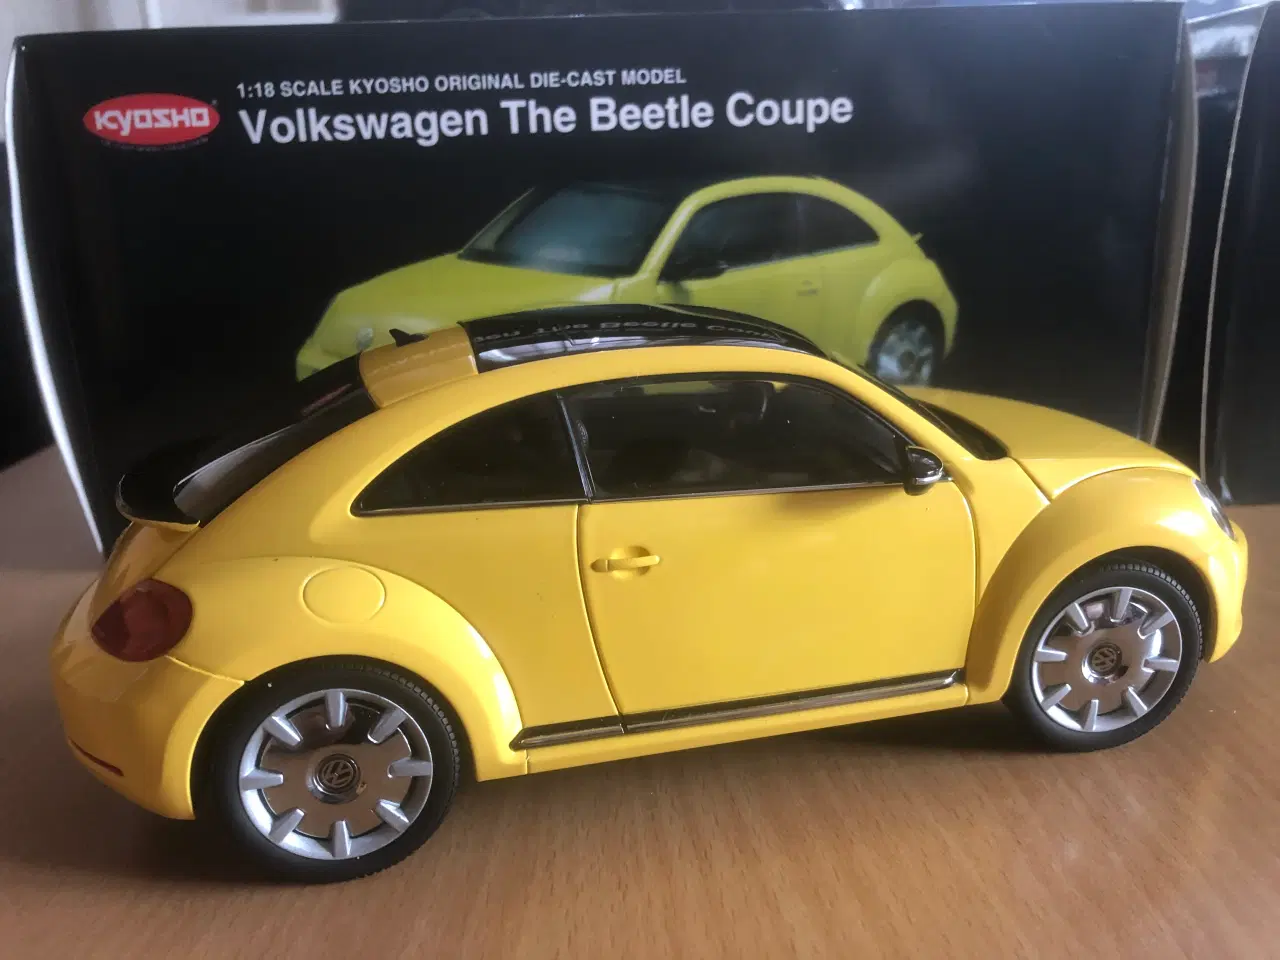 Billede 2 - 1:18 VW The Beetle Coupe